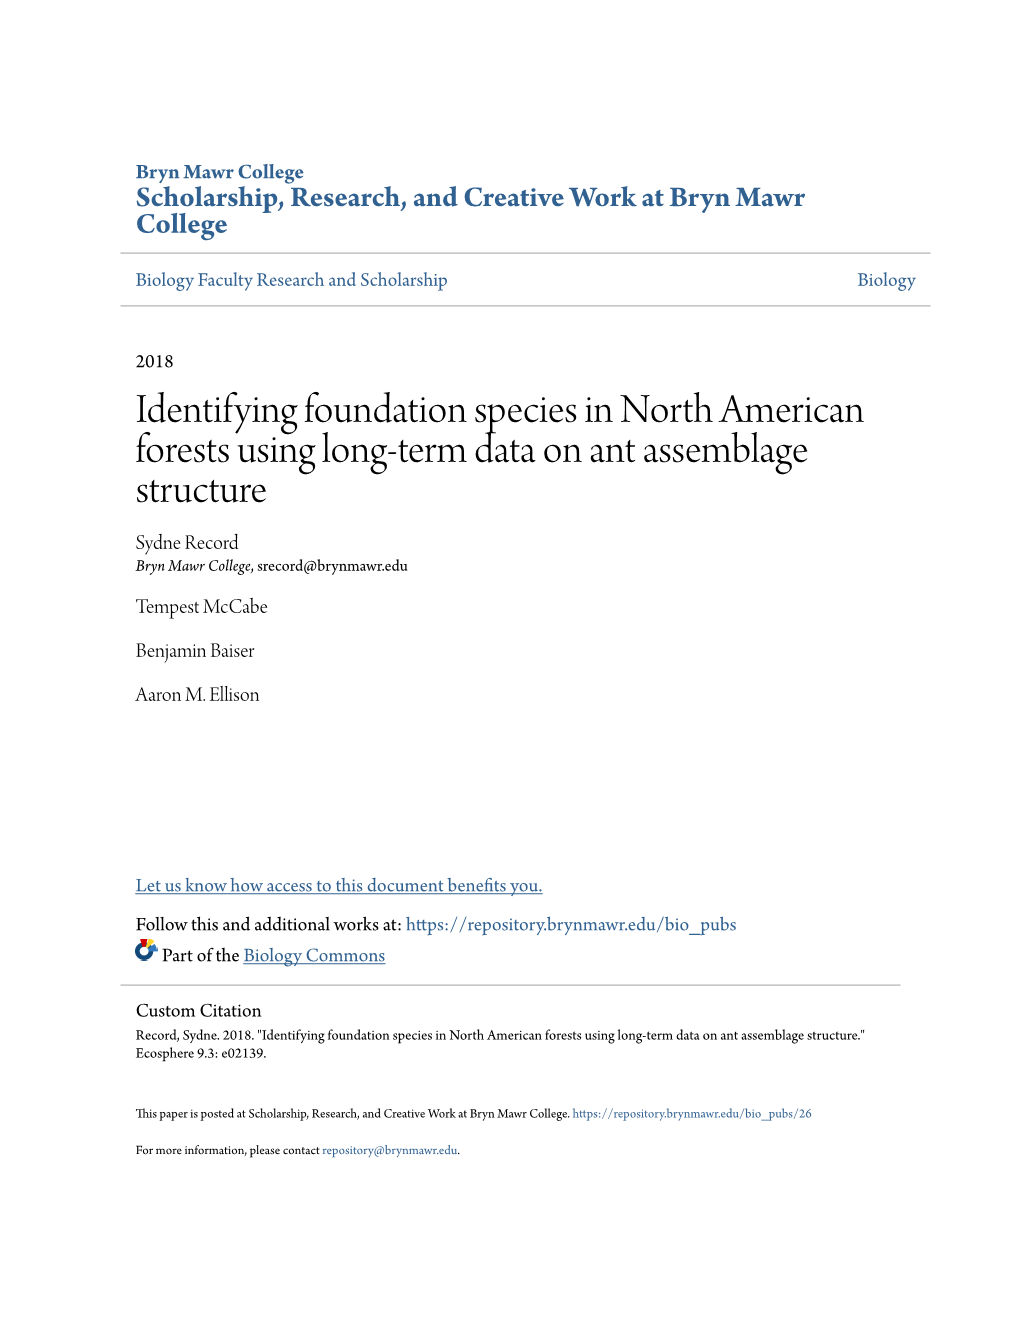 Identifying Foundation Species in North American Forests Using Longâ